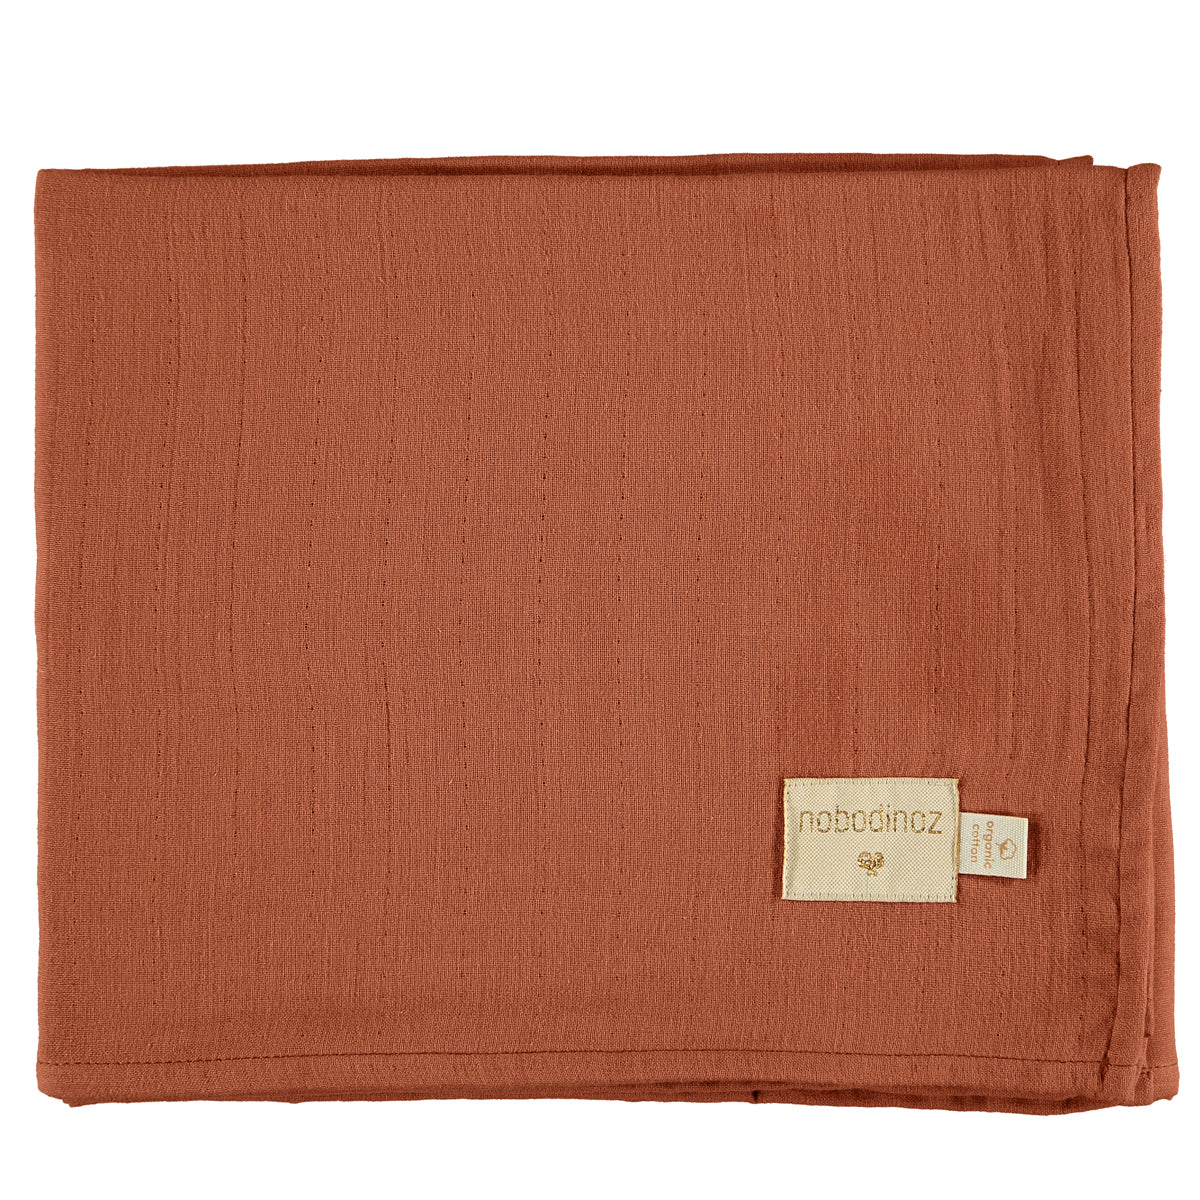 Nobodinoz Butterfly swaddle • toffee